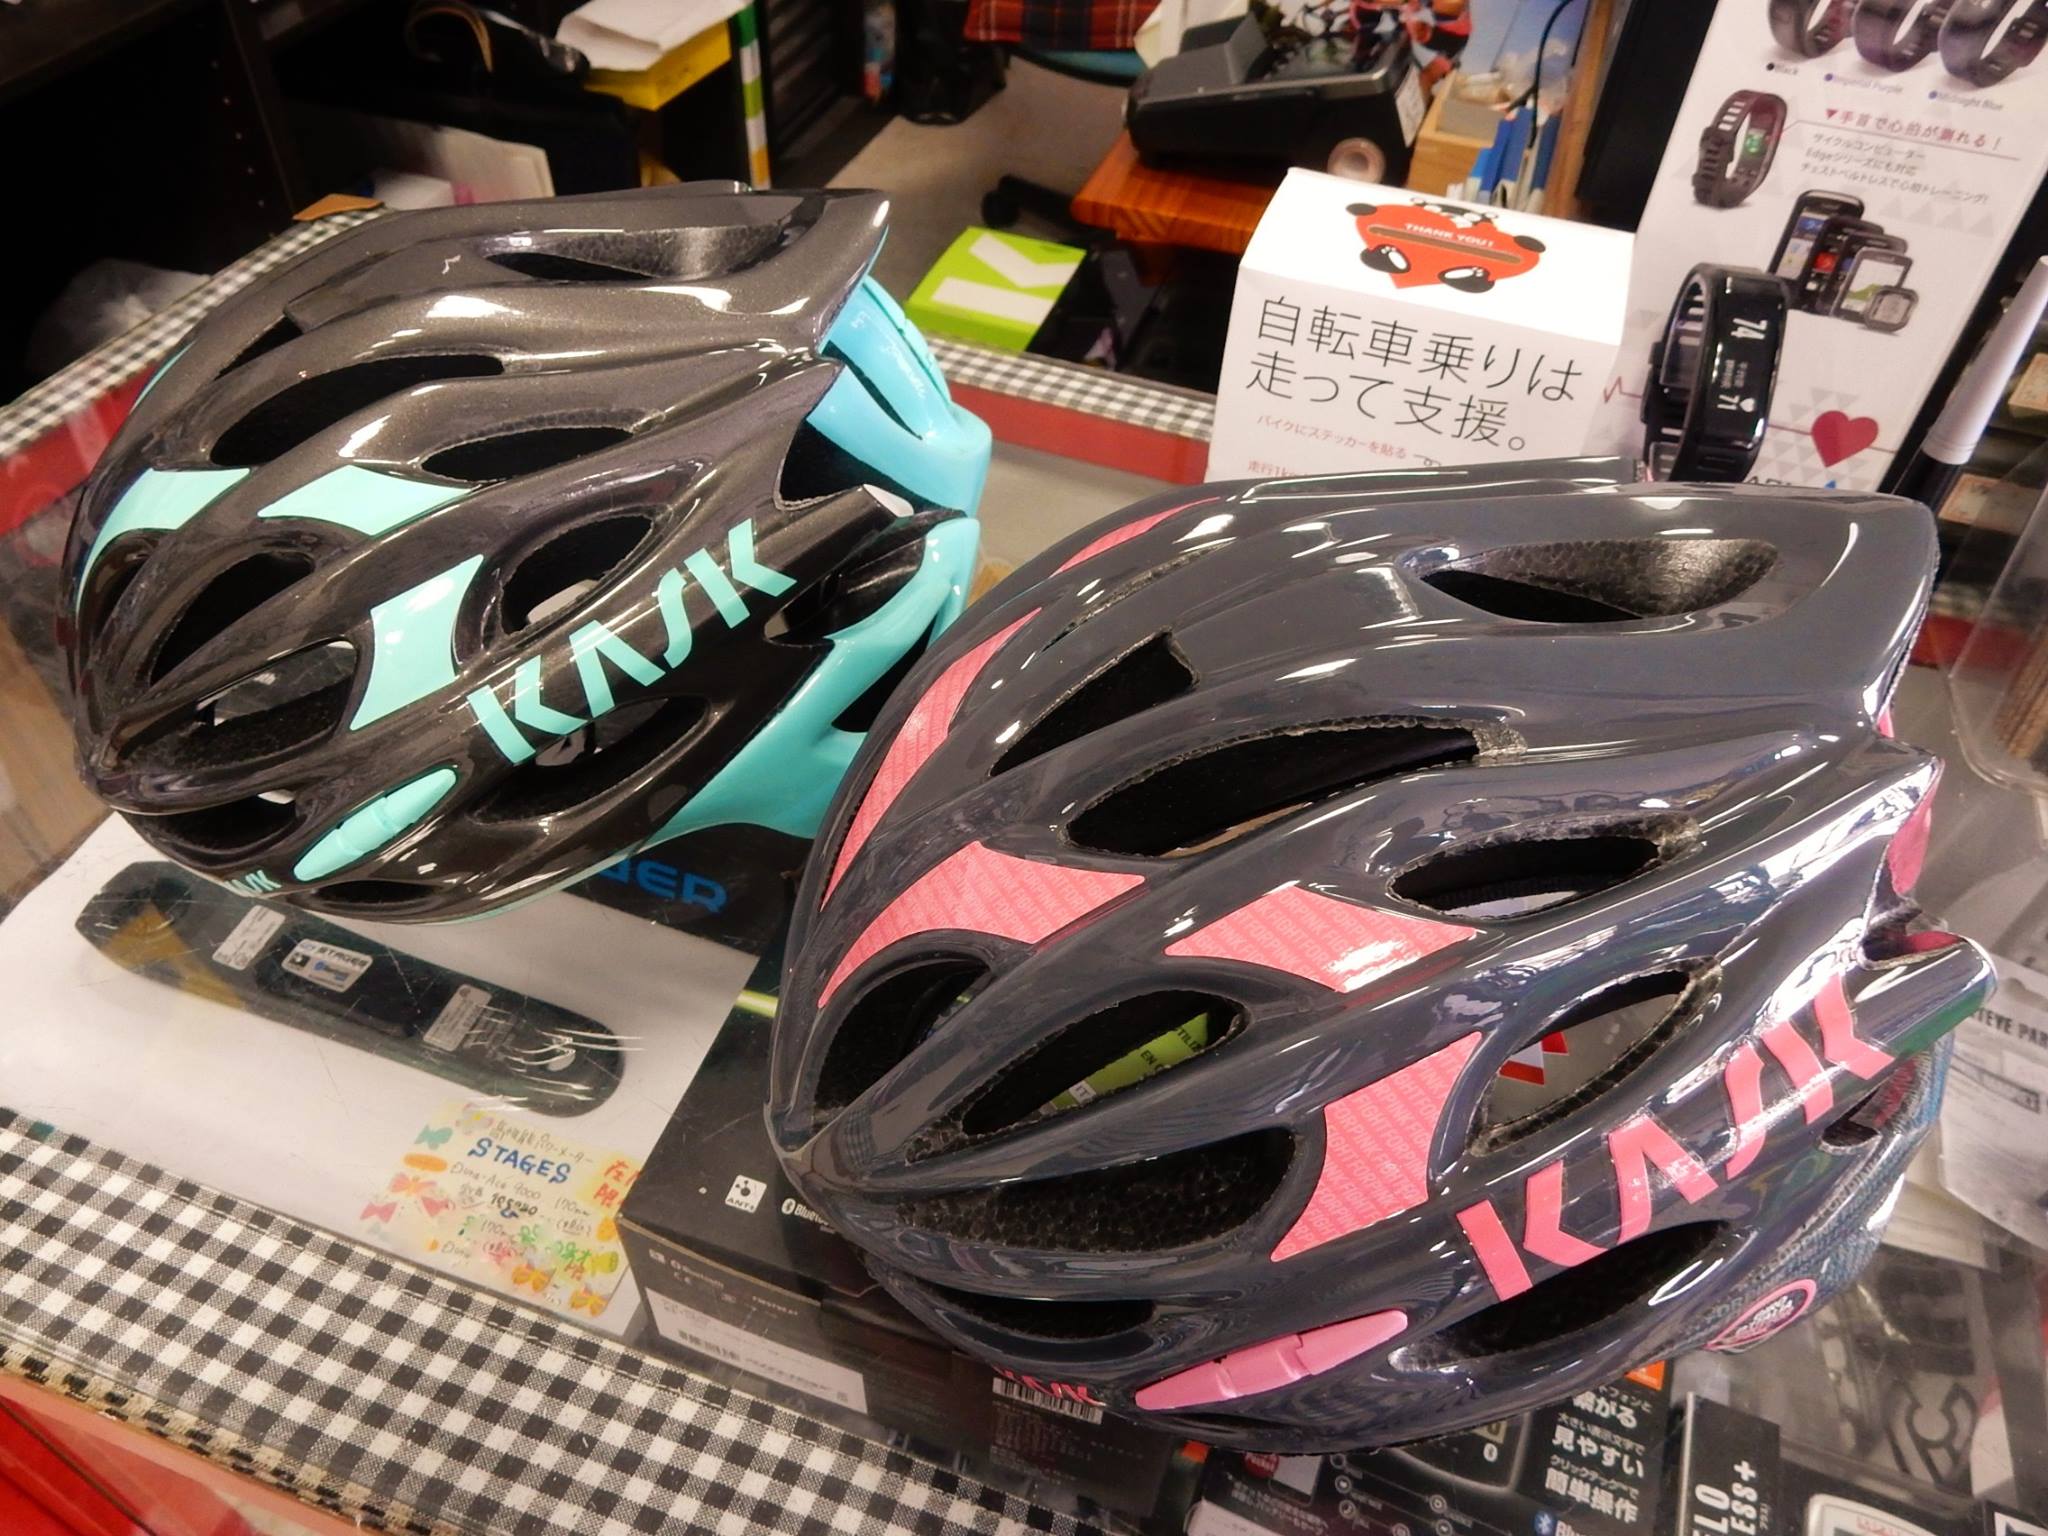 2016　KASK kask カスク　MOJITO mojito モヒート　ヘルメット　イタリアメーカー　広島県福山市　FINE fine ファイン